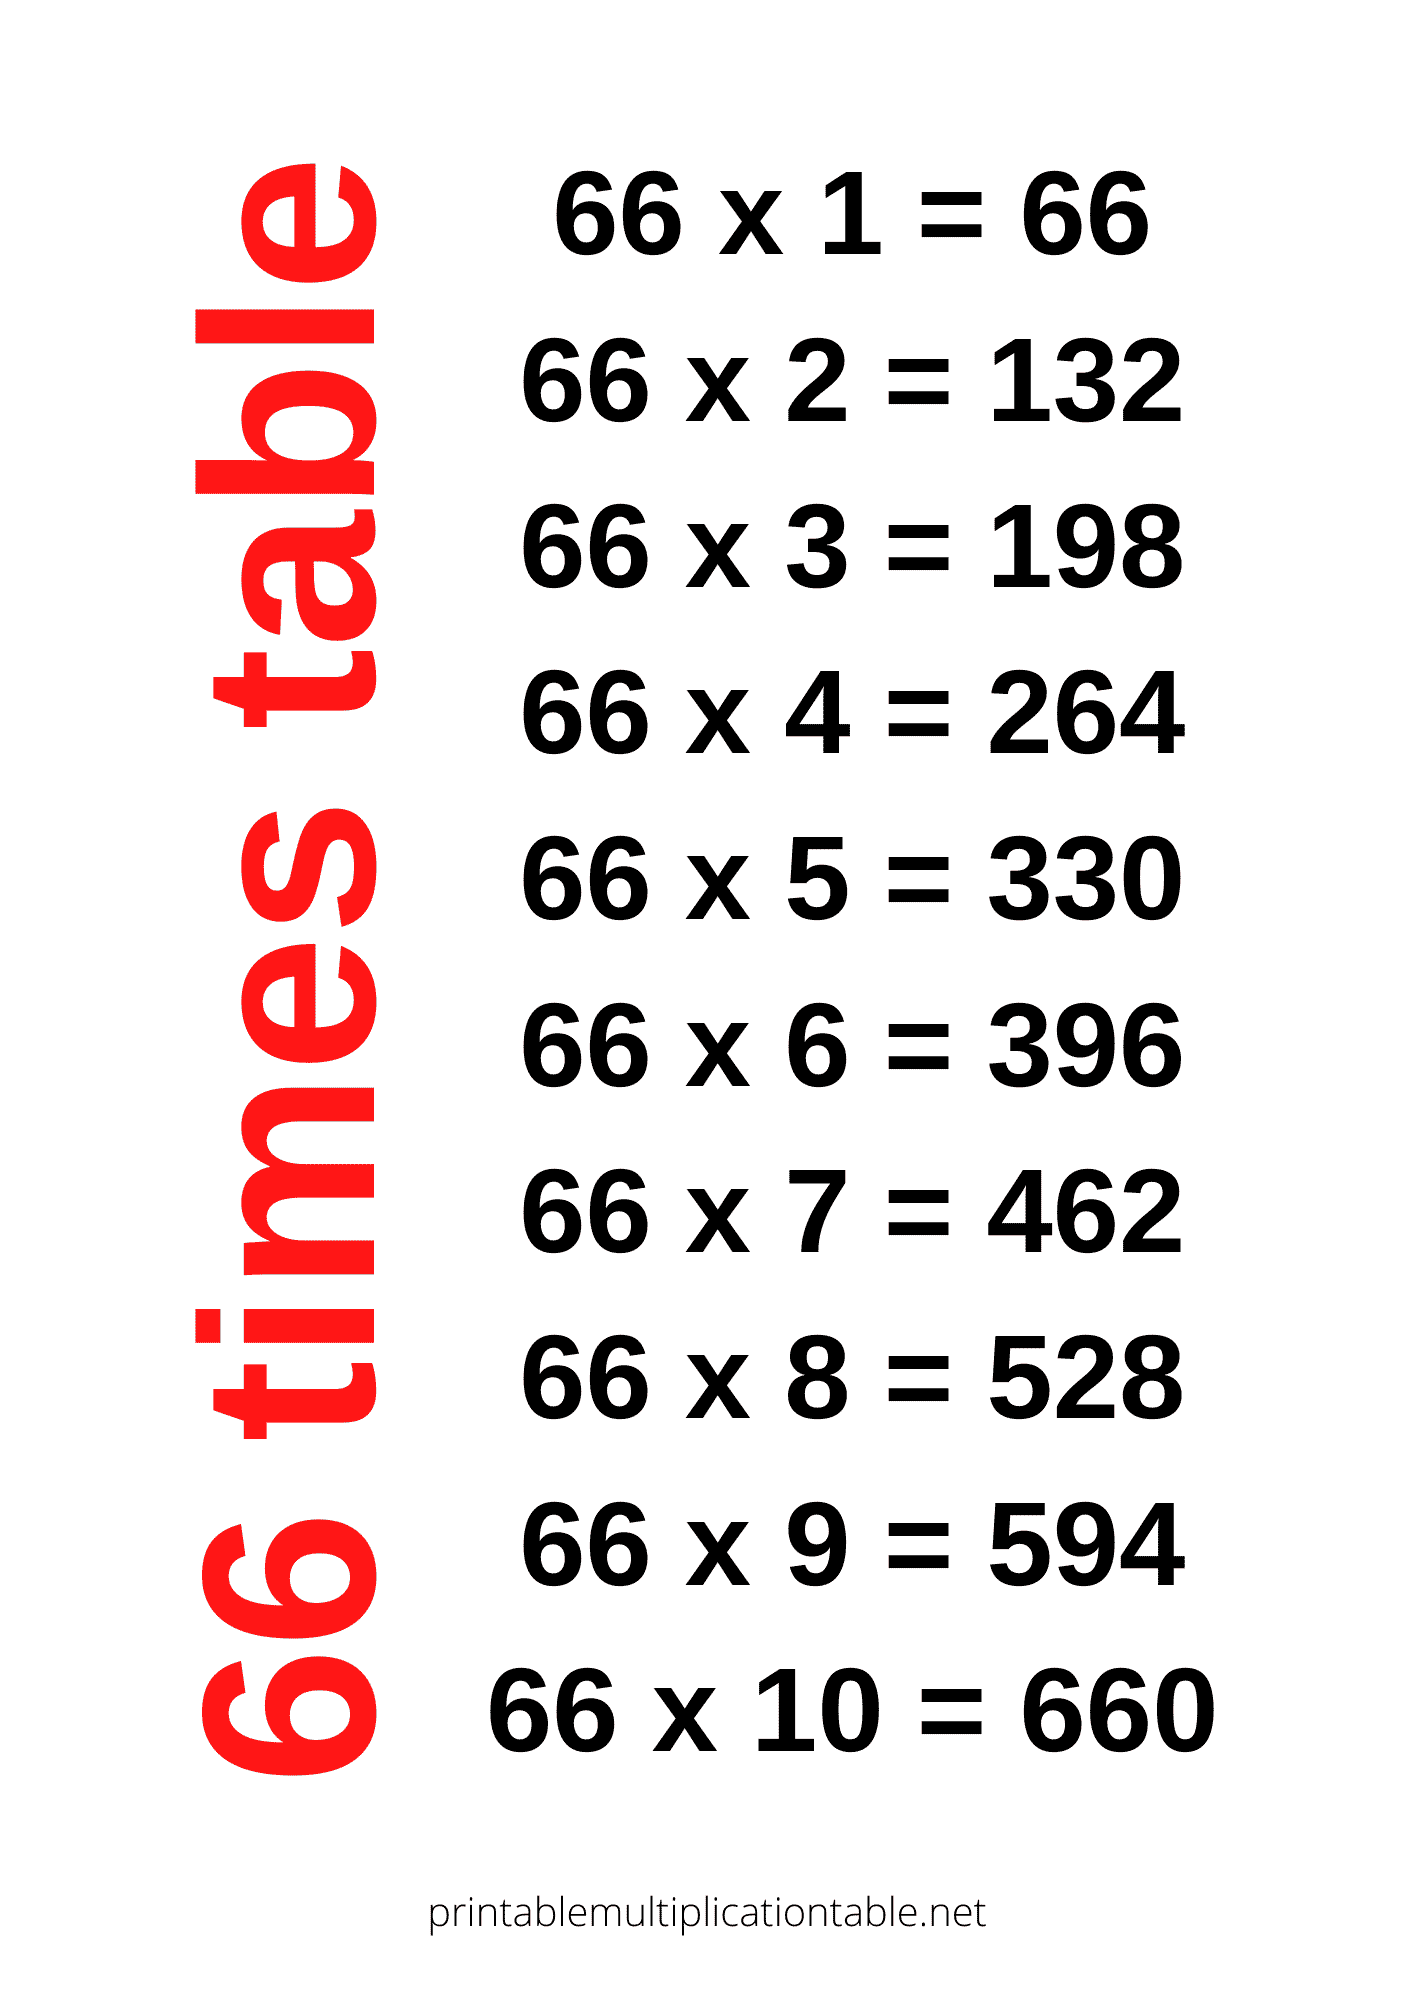 66 times table chart